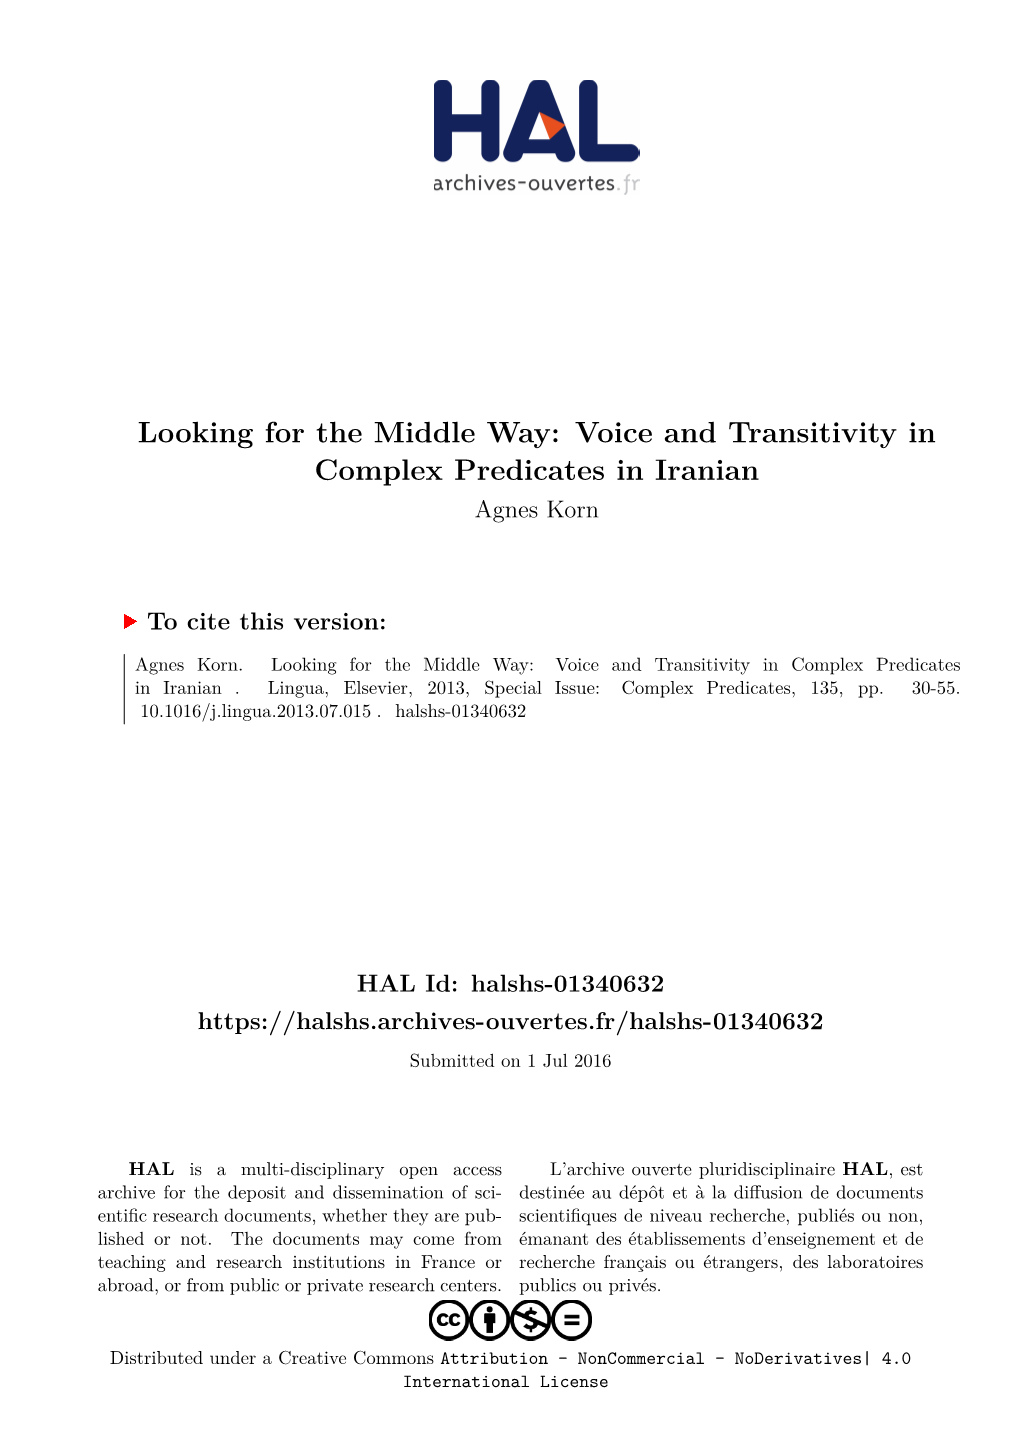 Voice and Transitivity in Complex Predicates in Iranian Agnes Korn